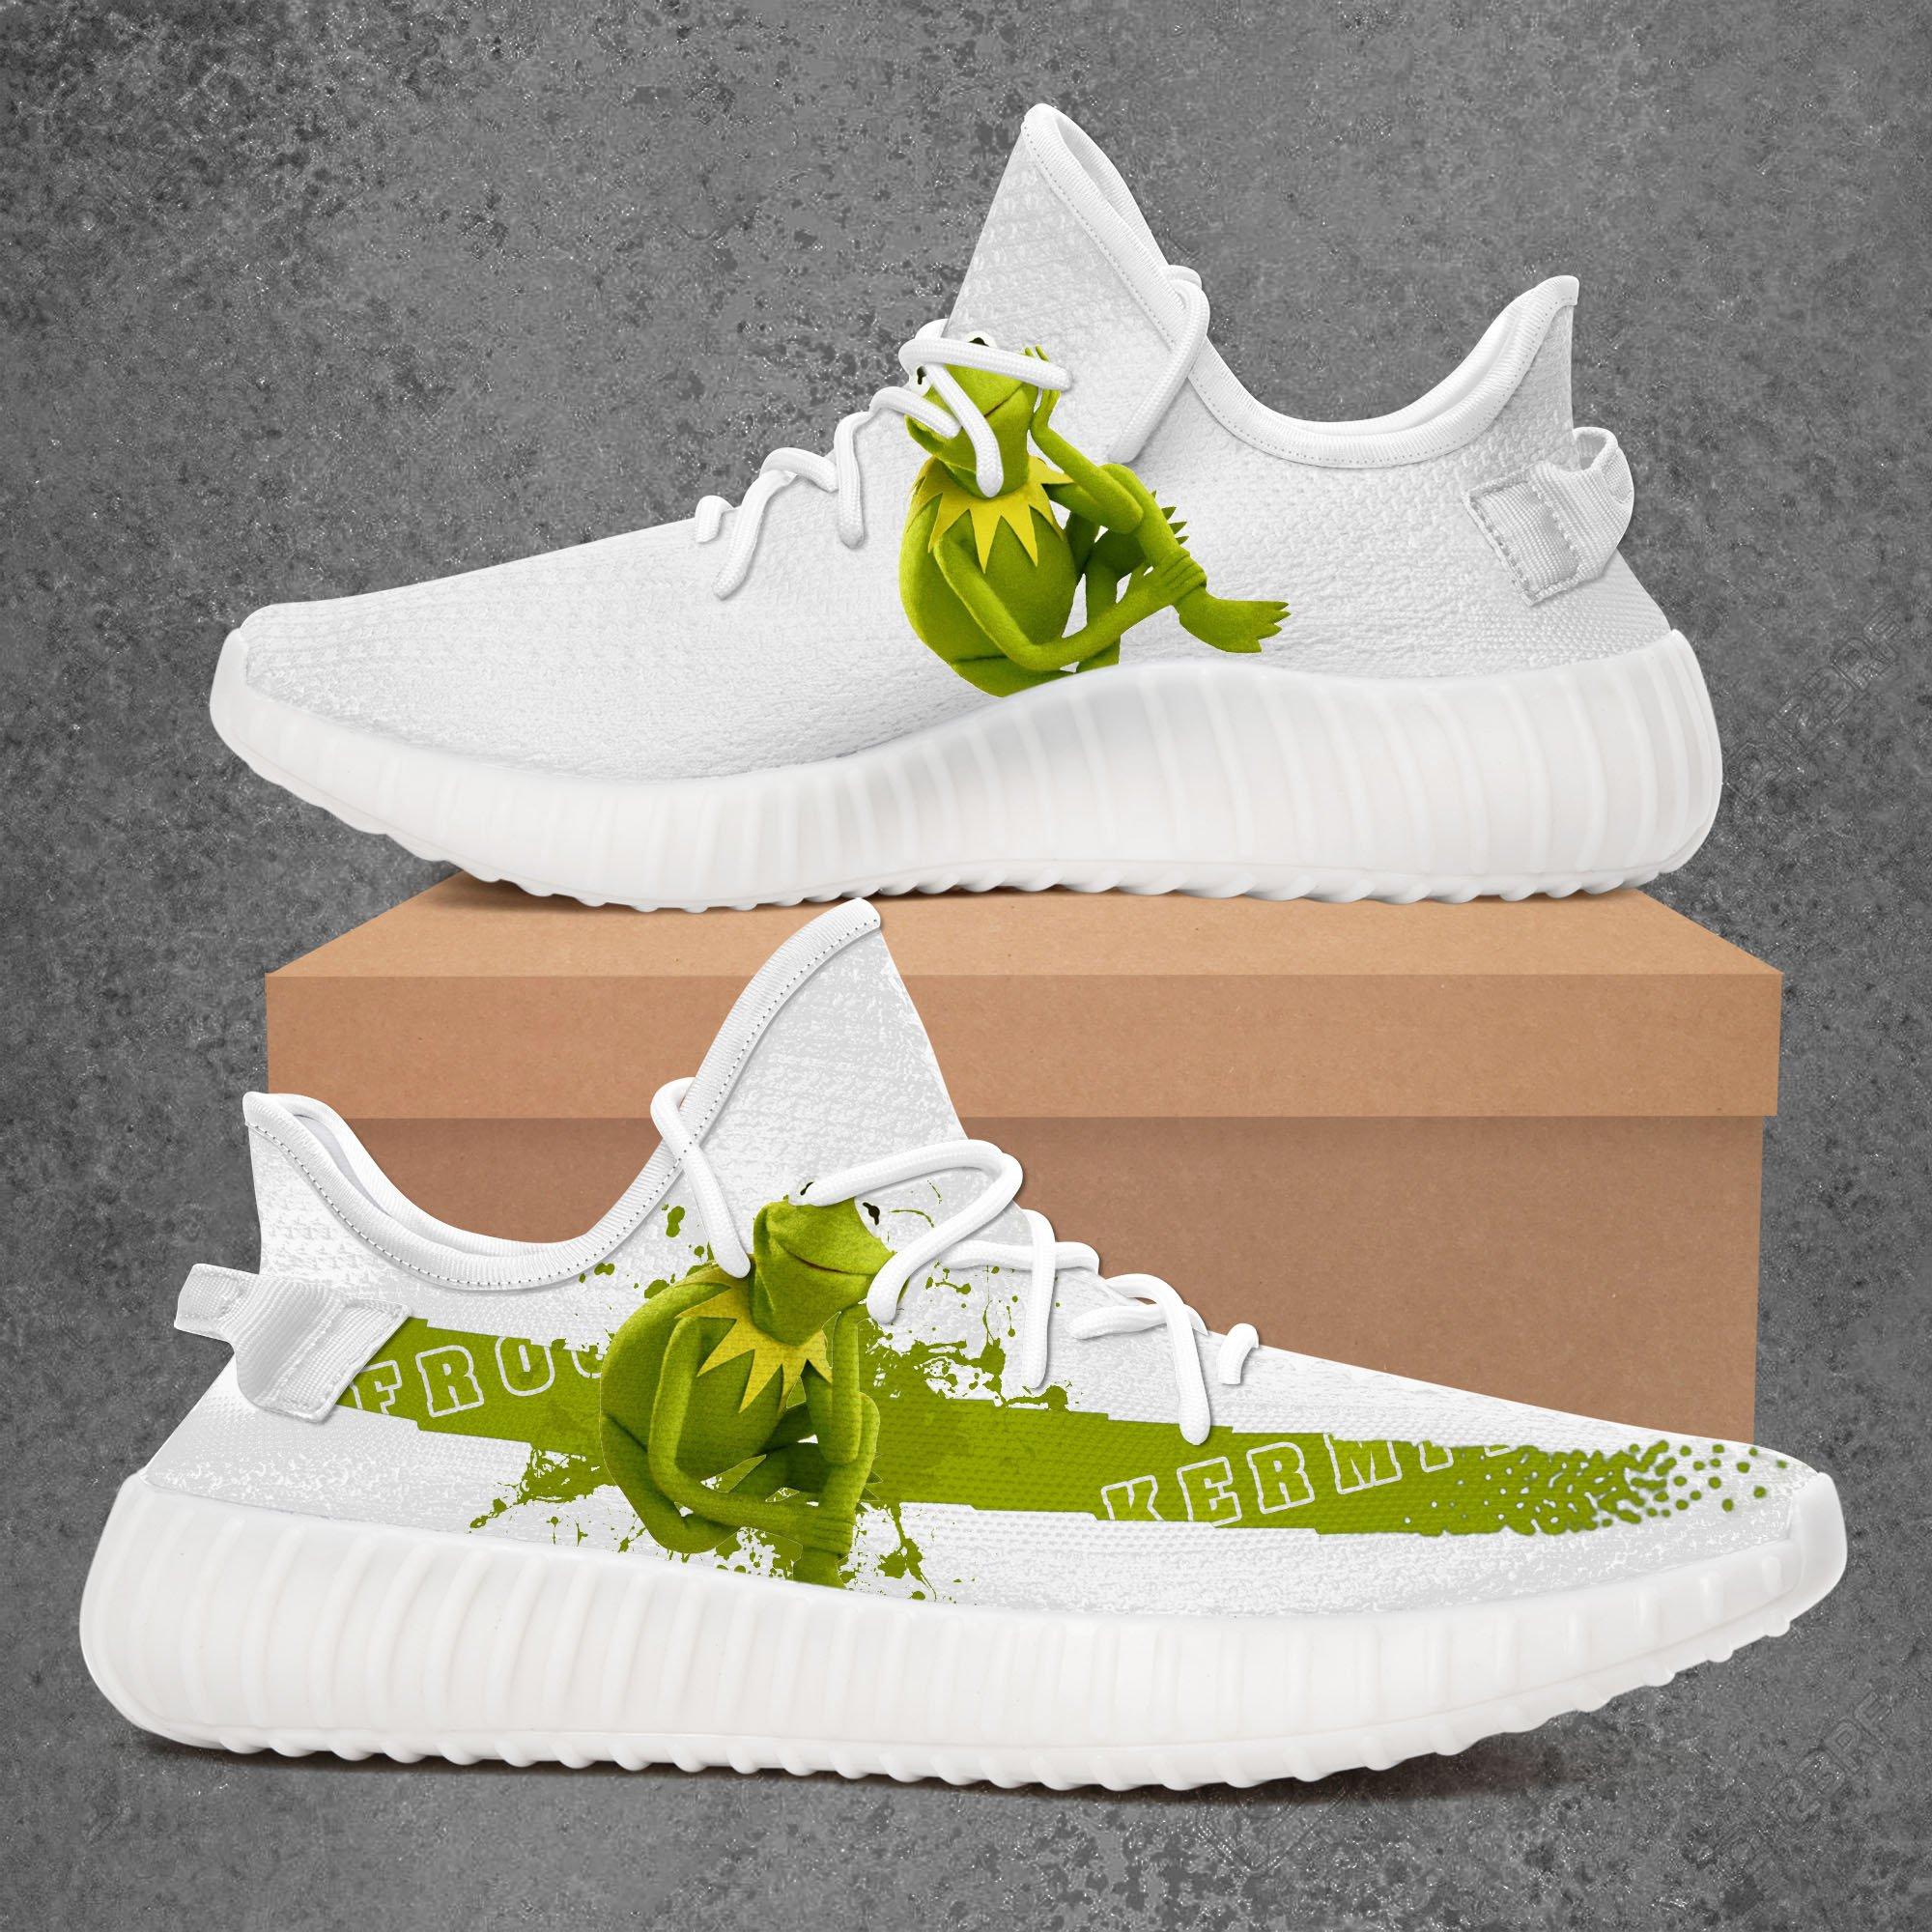 Frog Yeezy Boost 350 v2 Shoes 